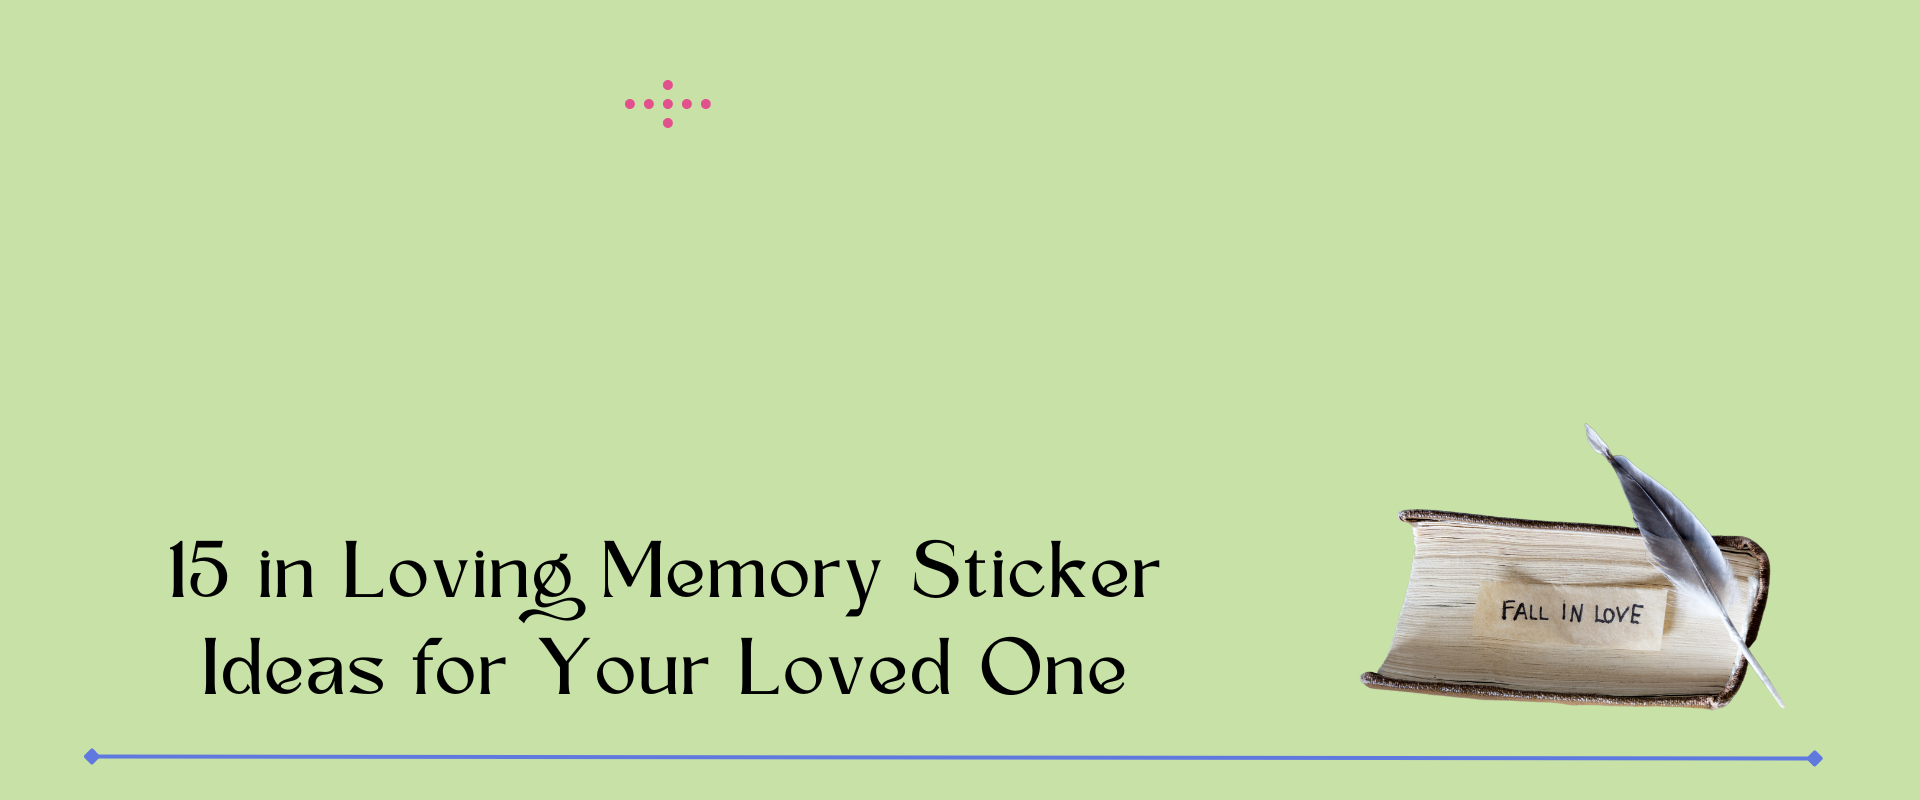 15 in Loving Memory Sticker Ideas for Your Loved One